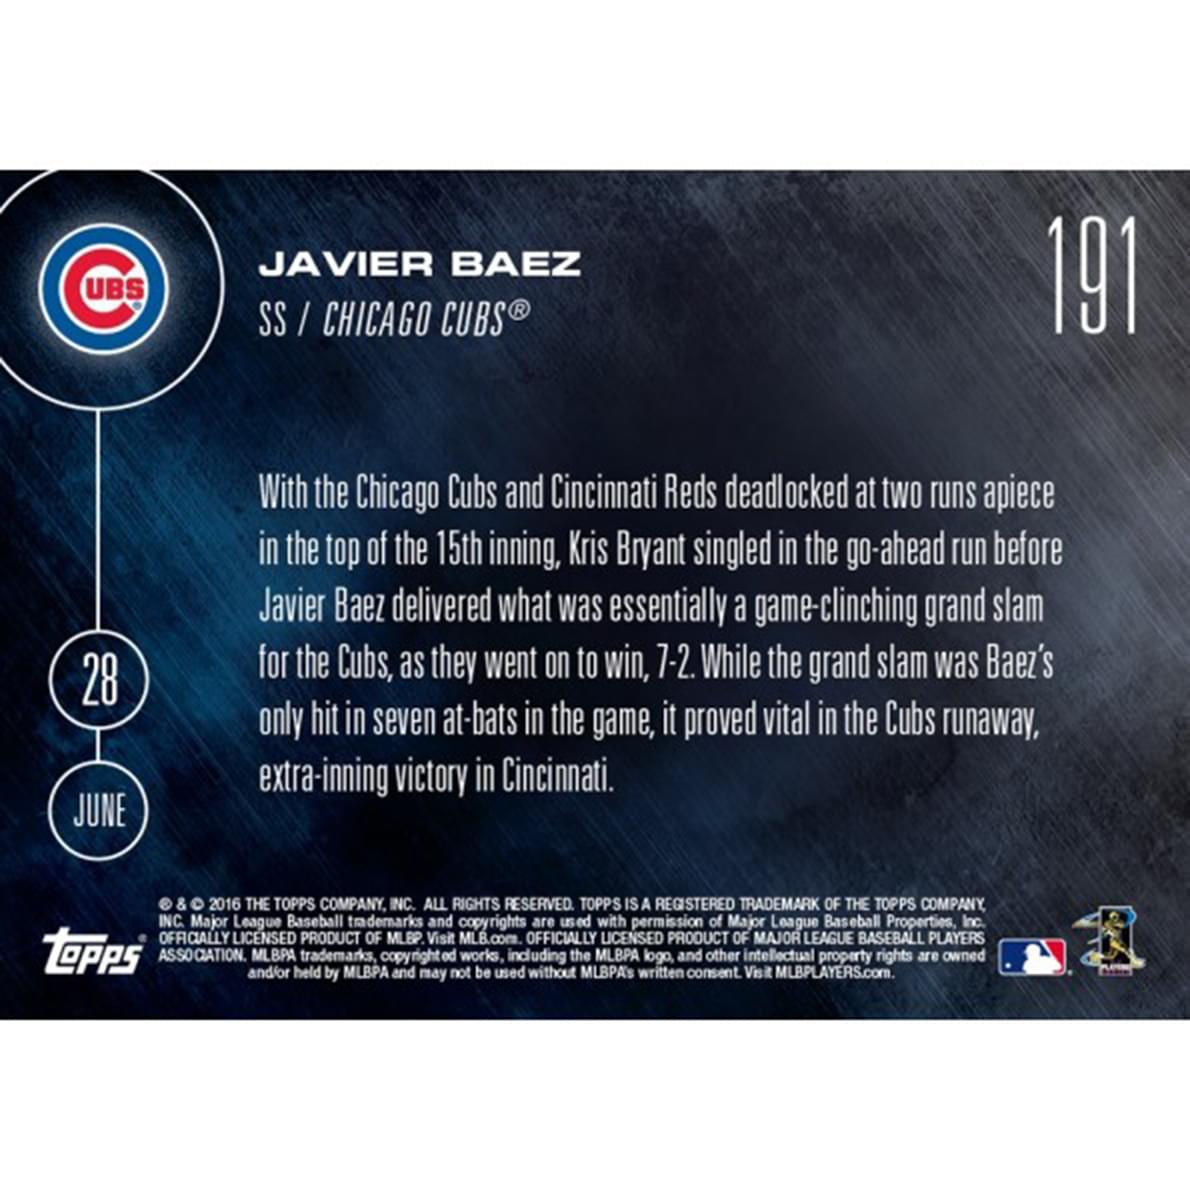 MLB 2016 Topps NOW Card 191 Chicago Cubs Javier Baez Trading Card